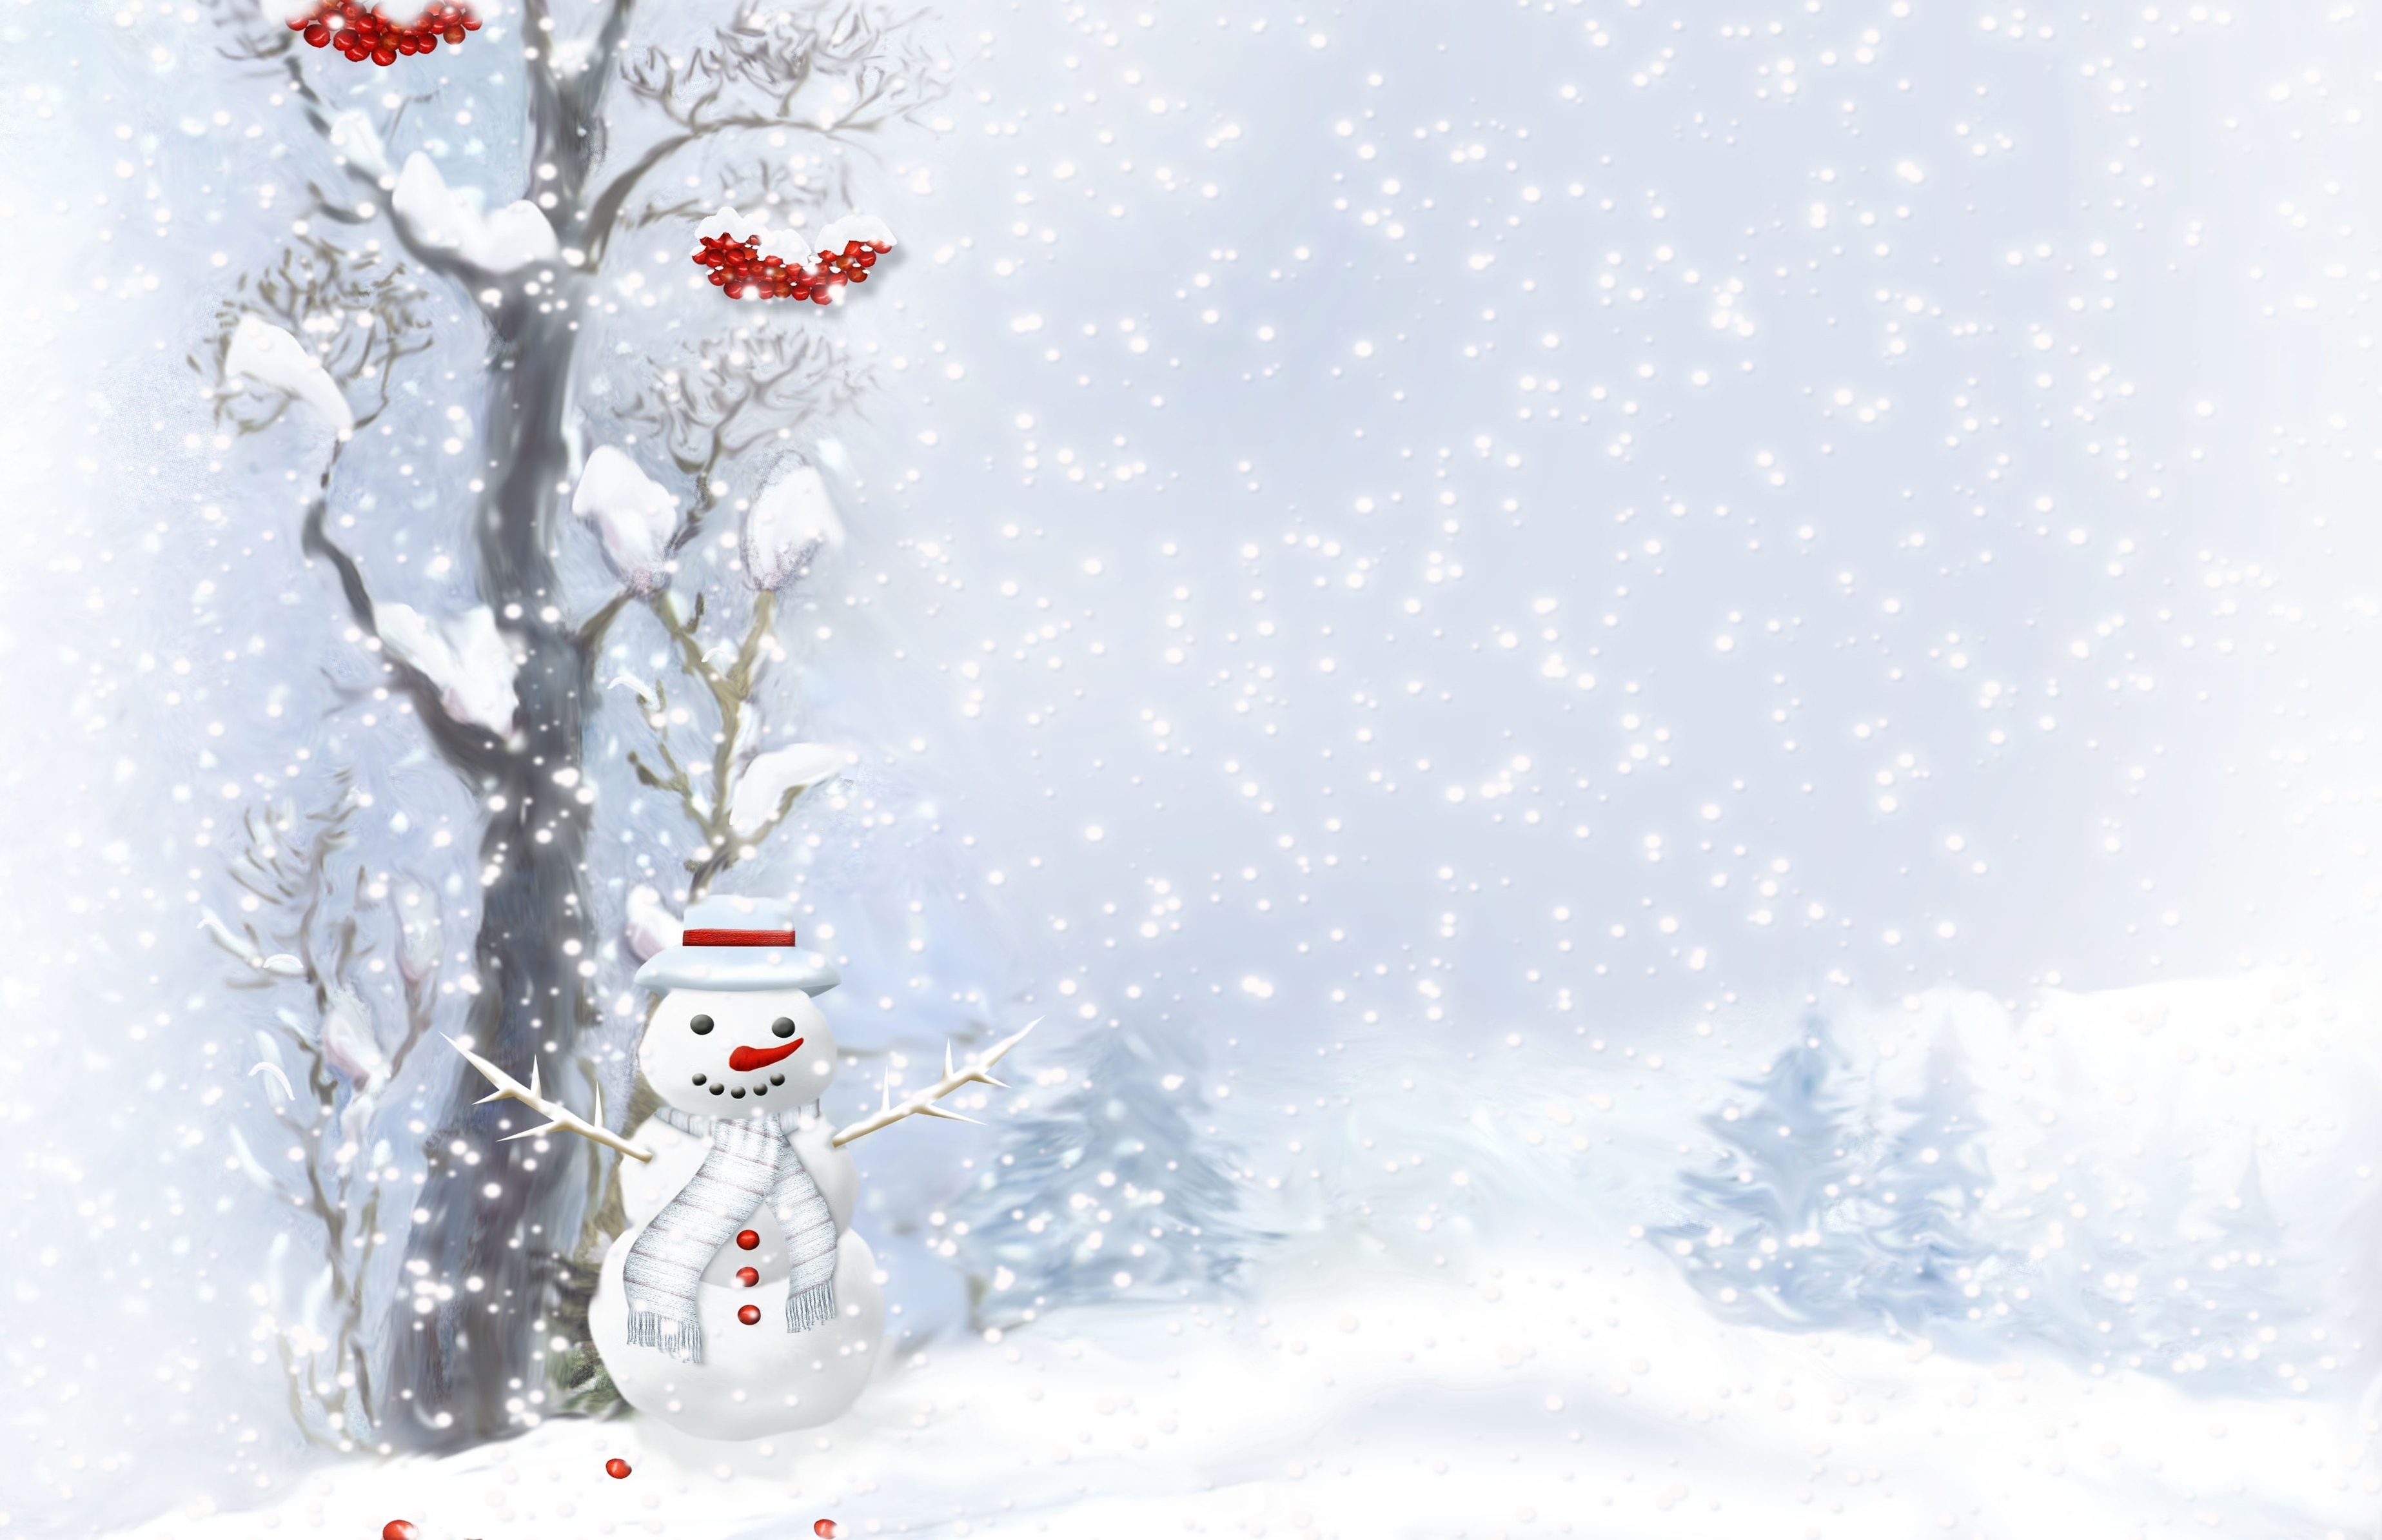 holidays, berries, snowman, wood, tree, buttons, snowfall, scarf, christmas trees